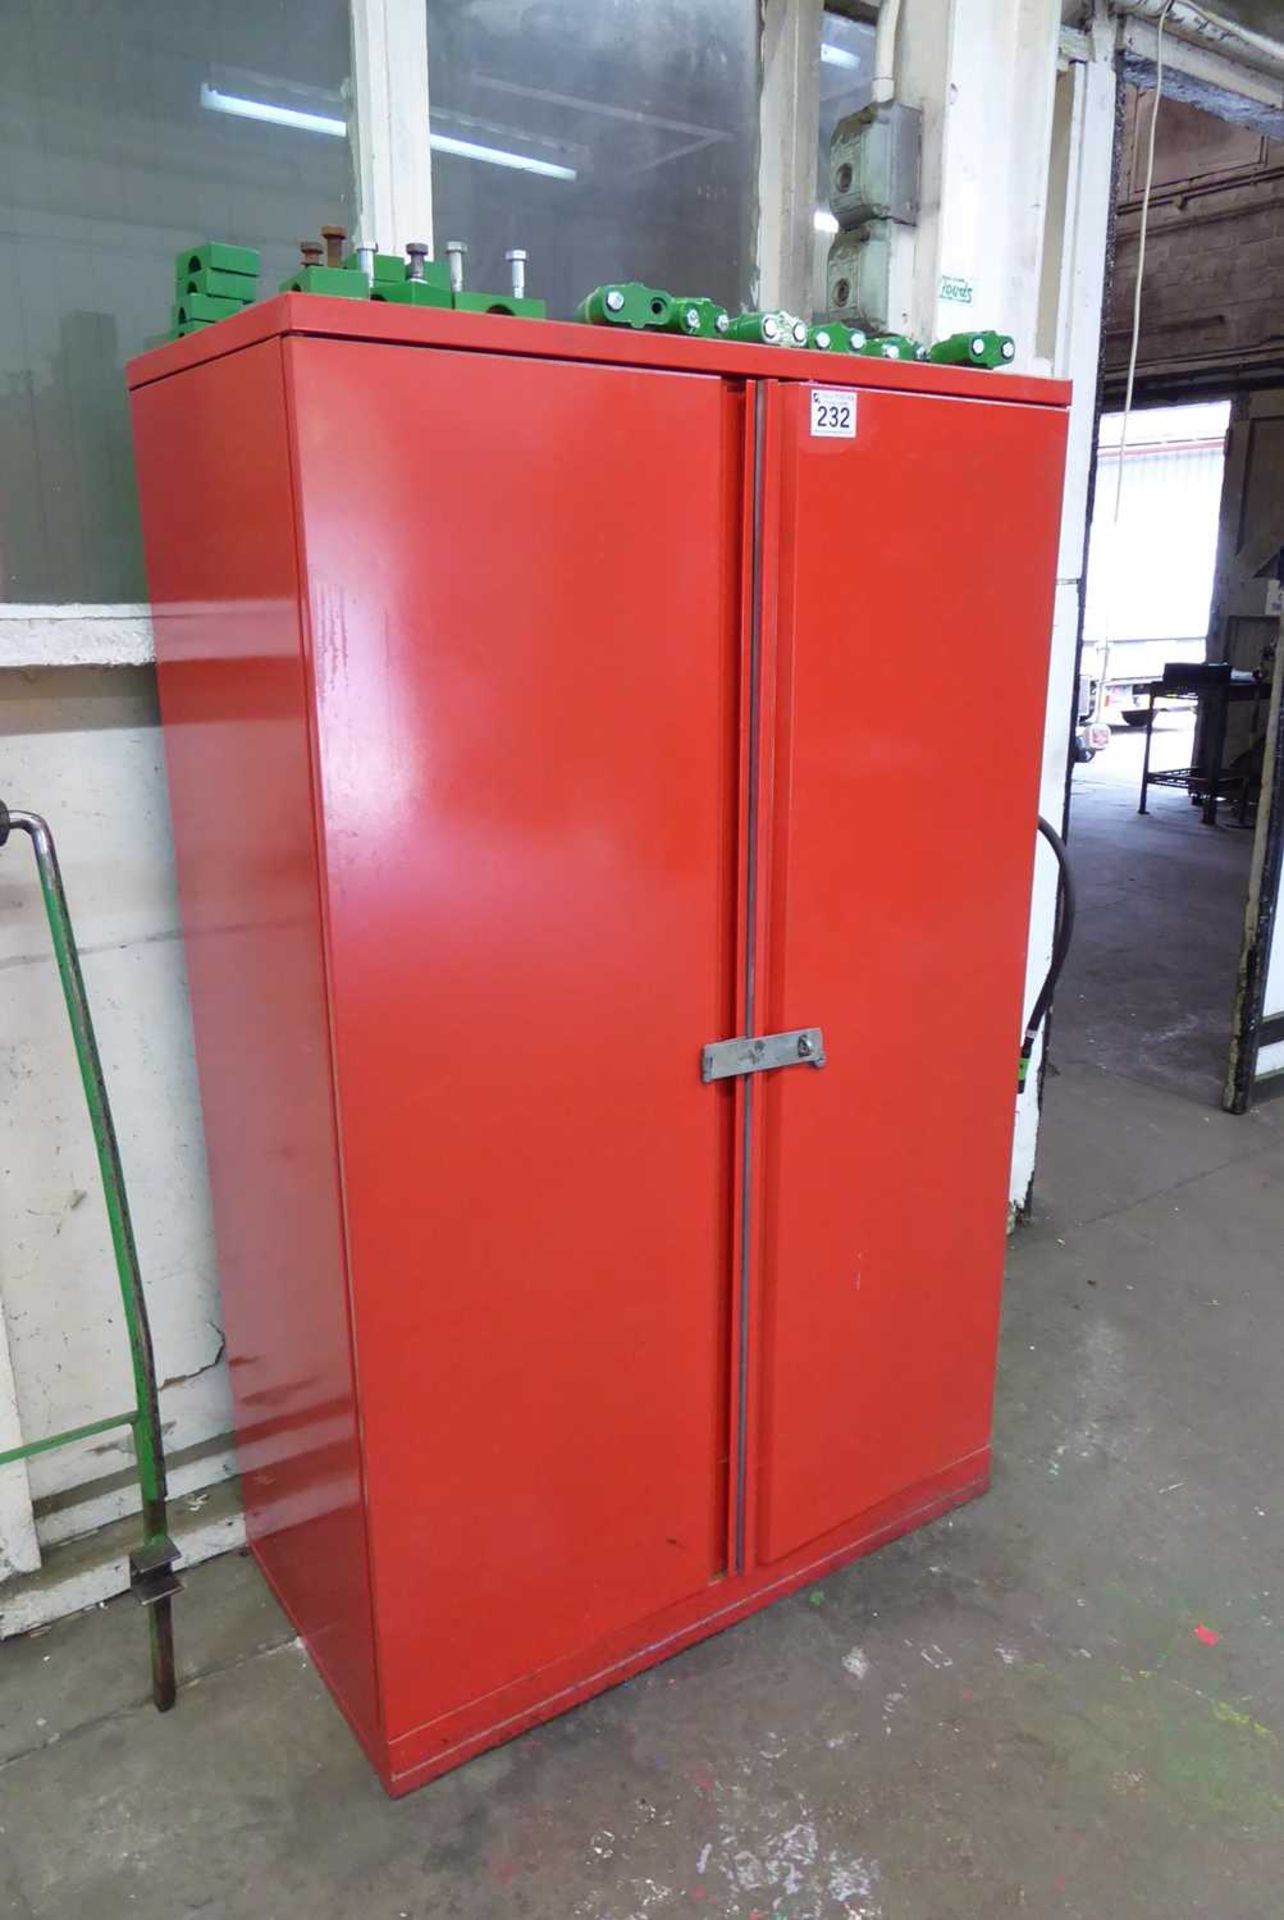 +VAT Red steel double door storage cabinet and similar small machinists cabinet